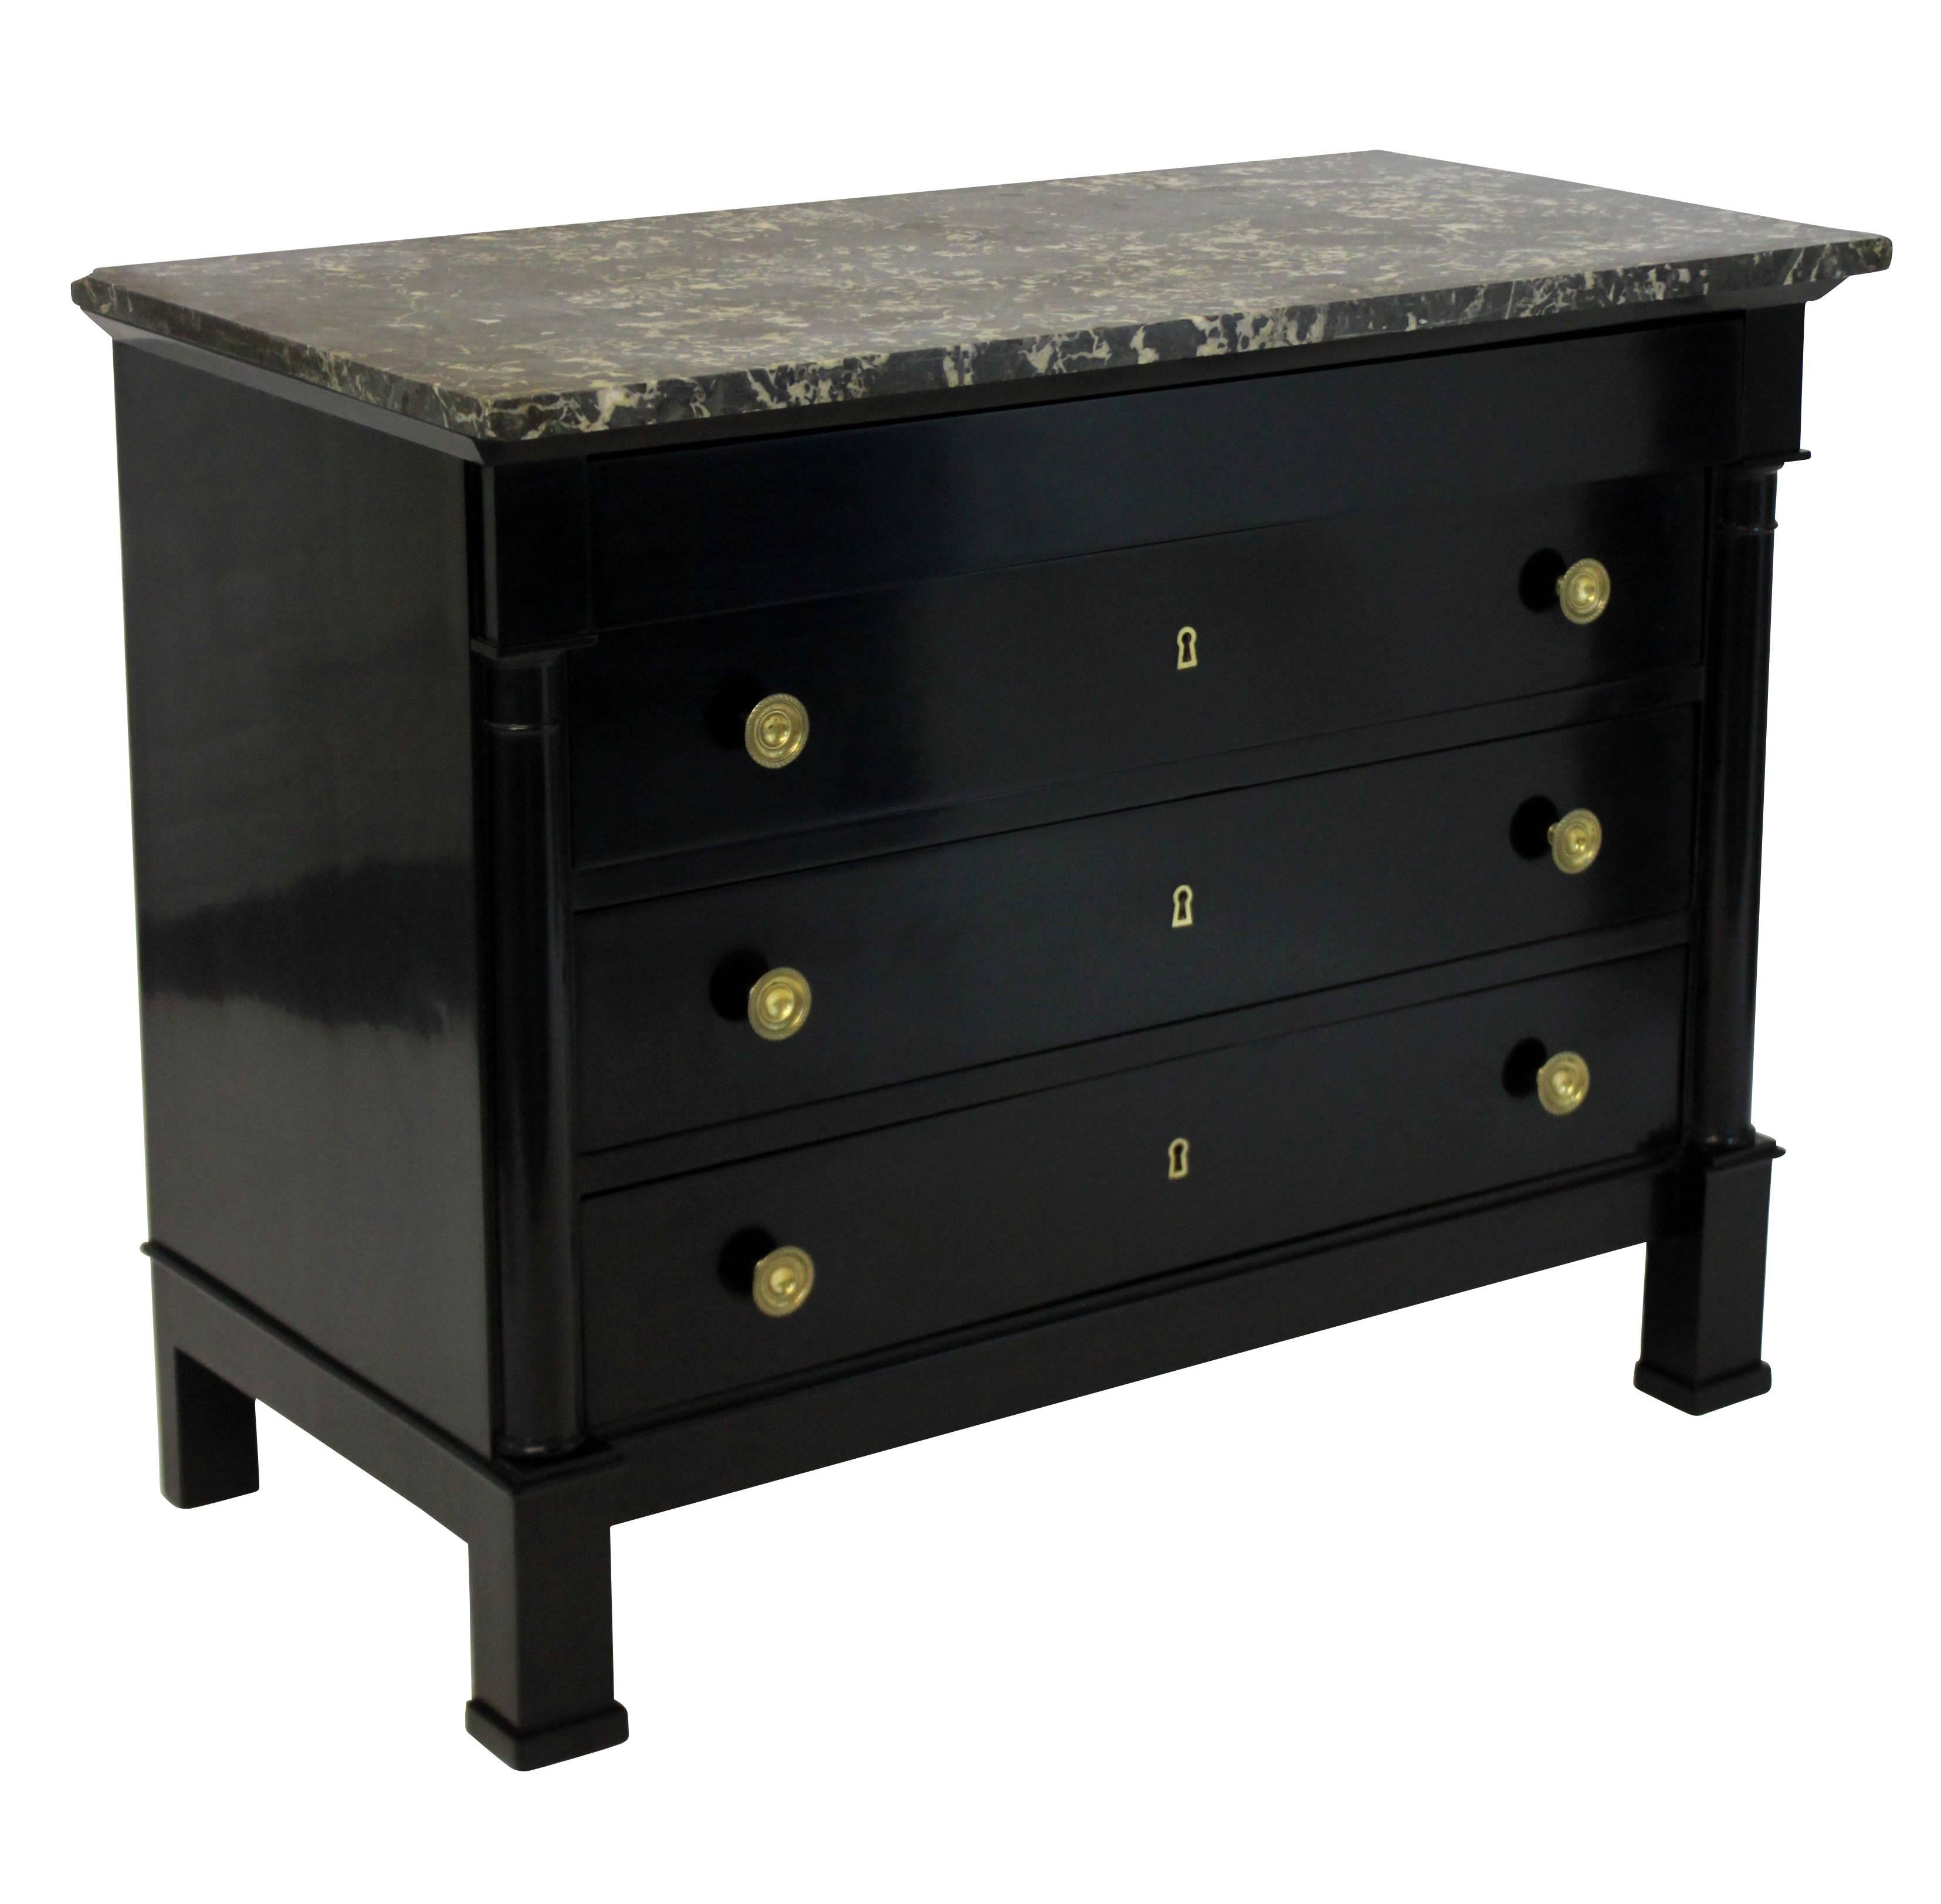 An ebonized mahogany French commode consisting four drawers, with brass handles, bone key surrounds and a good handcut dark grey marble top.
     